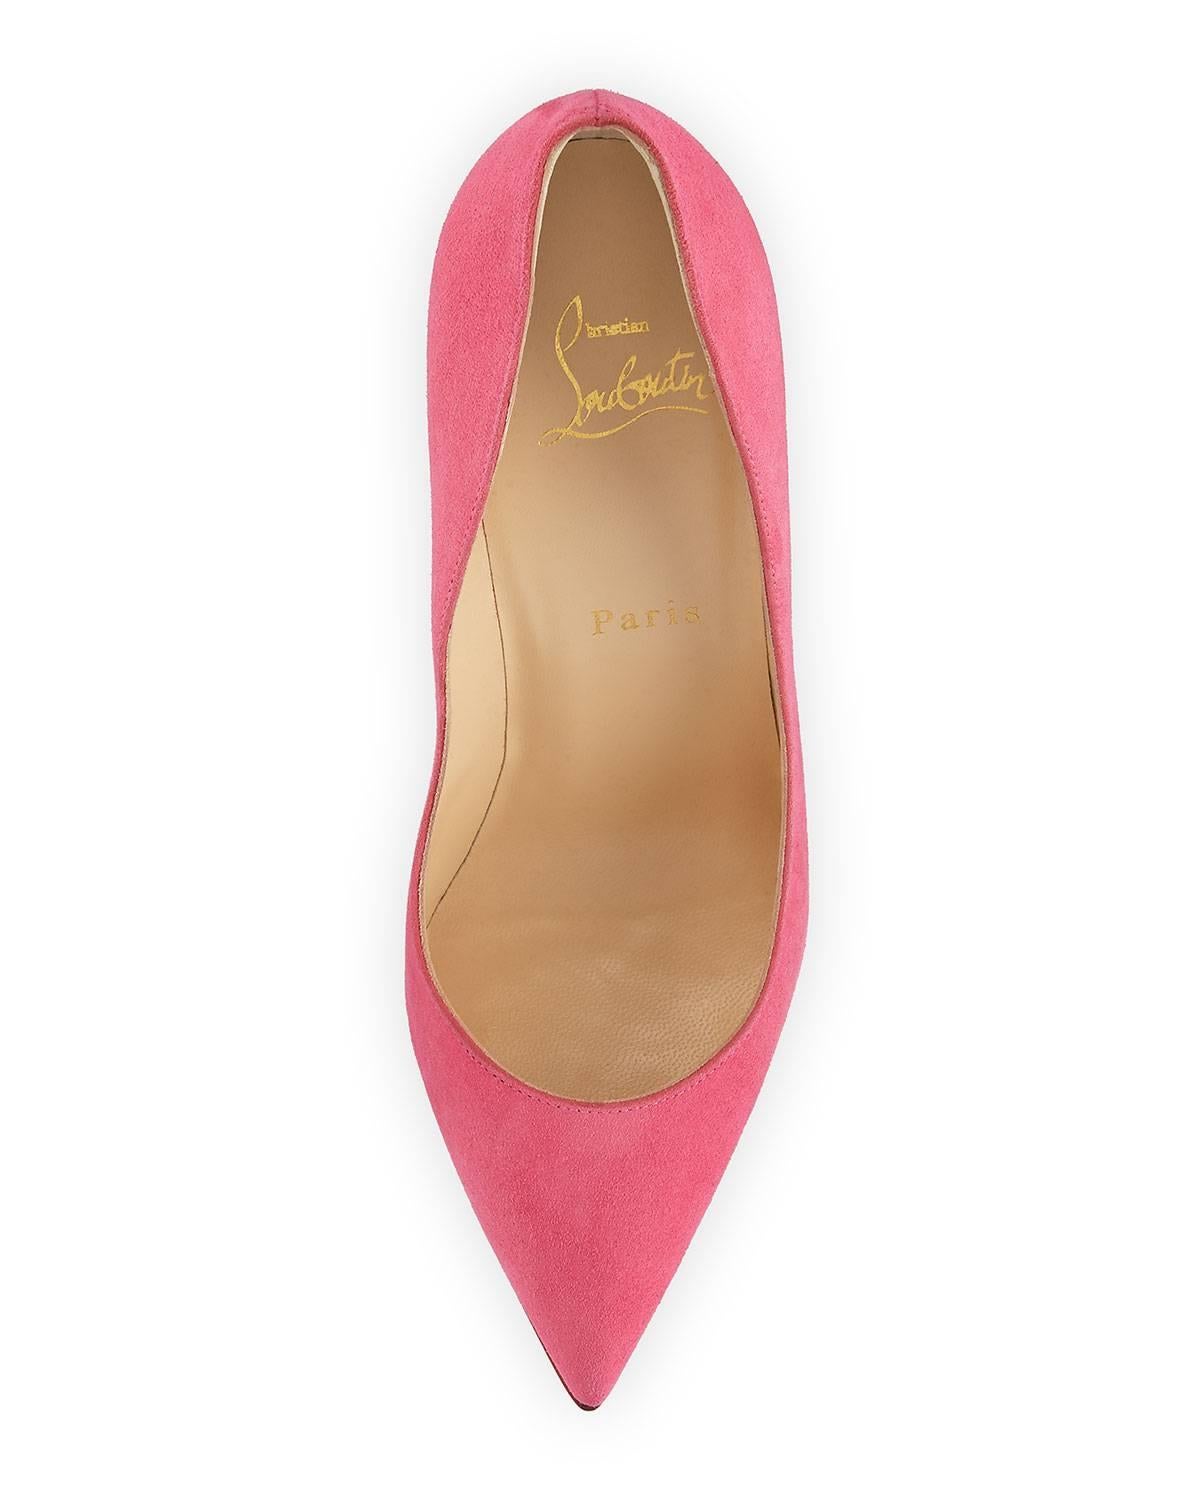 Christian Louboutin New Pink Suede Pigalle Follie High Heels Pumps in Box In New Condition In Chicago, IL